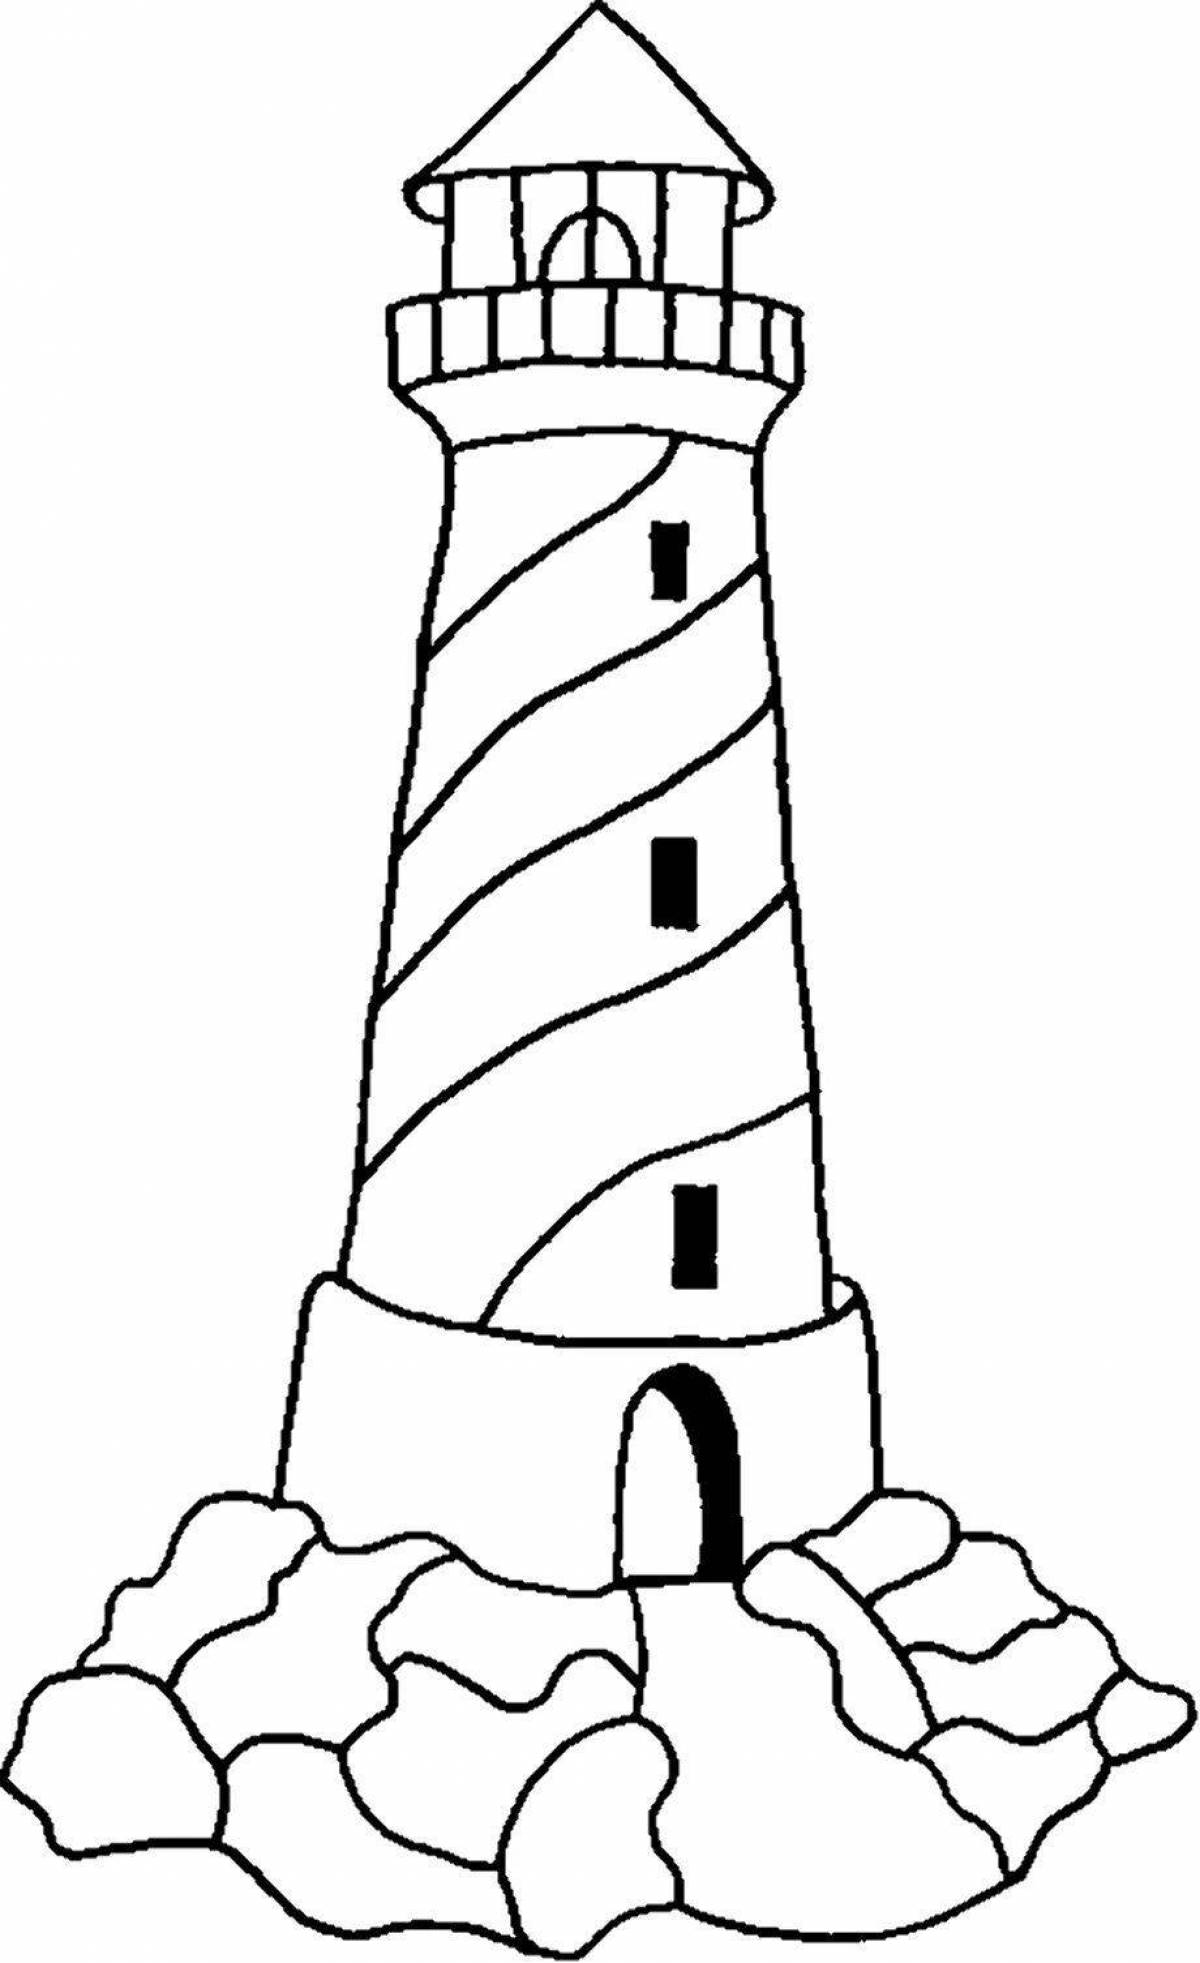 Exquisite tower coloring book for kids